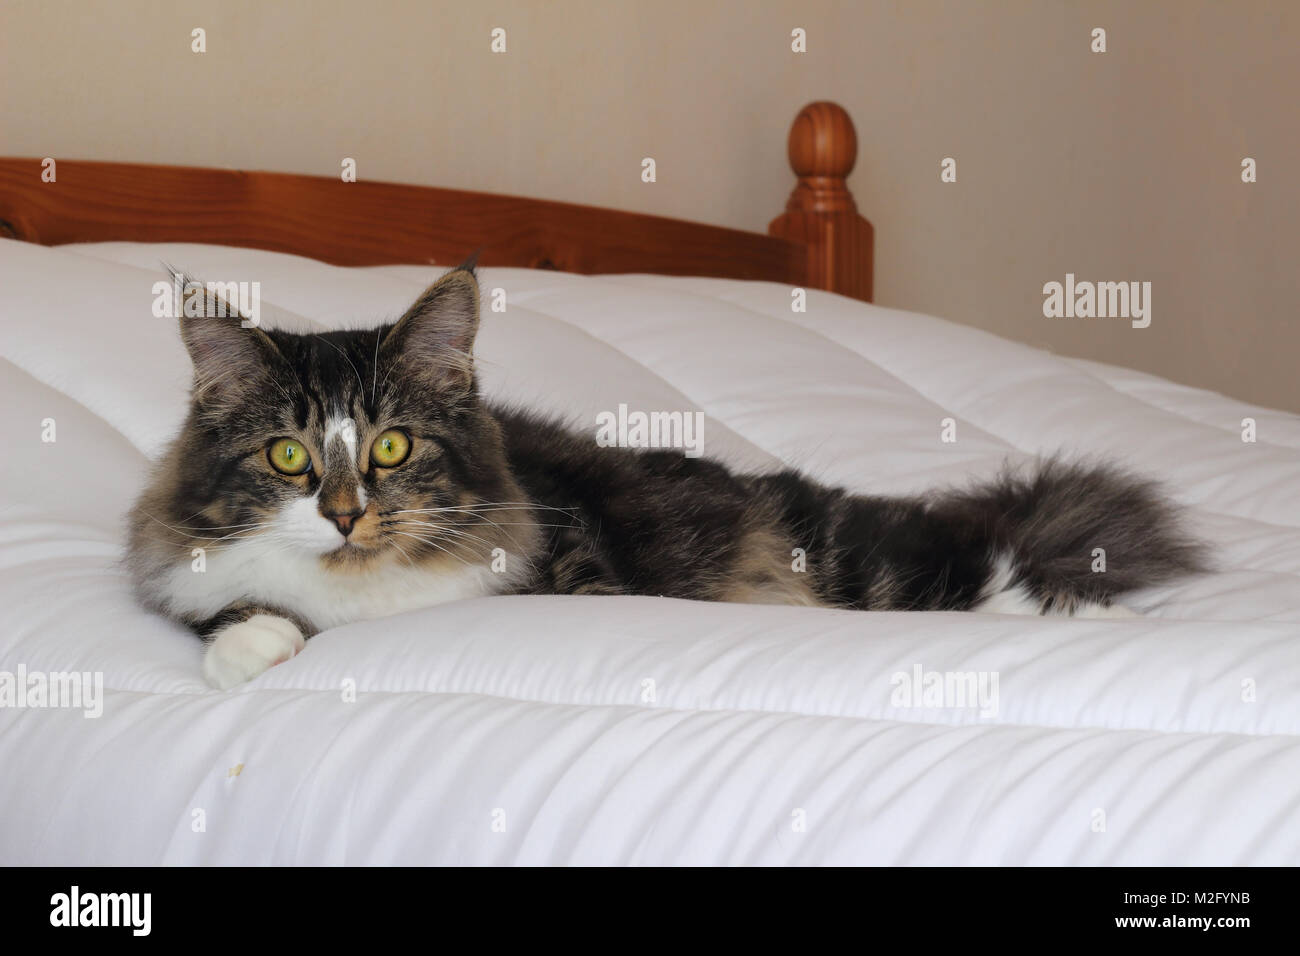 a photography of Maine Coon cat with green eyes with piercing eyes that charm you lying on a white duvet Stock Photo